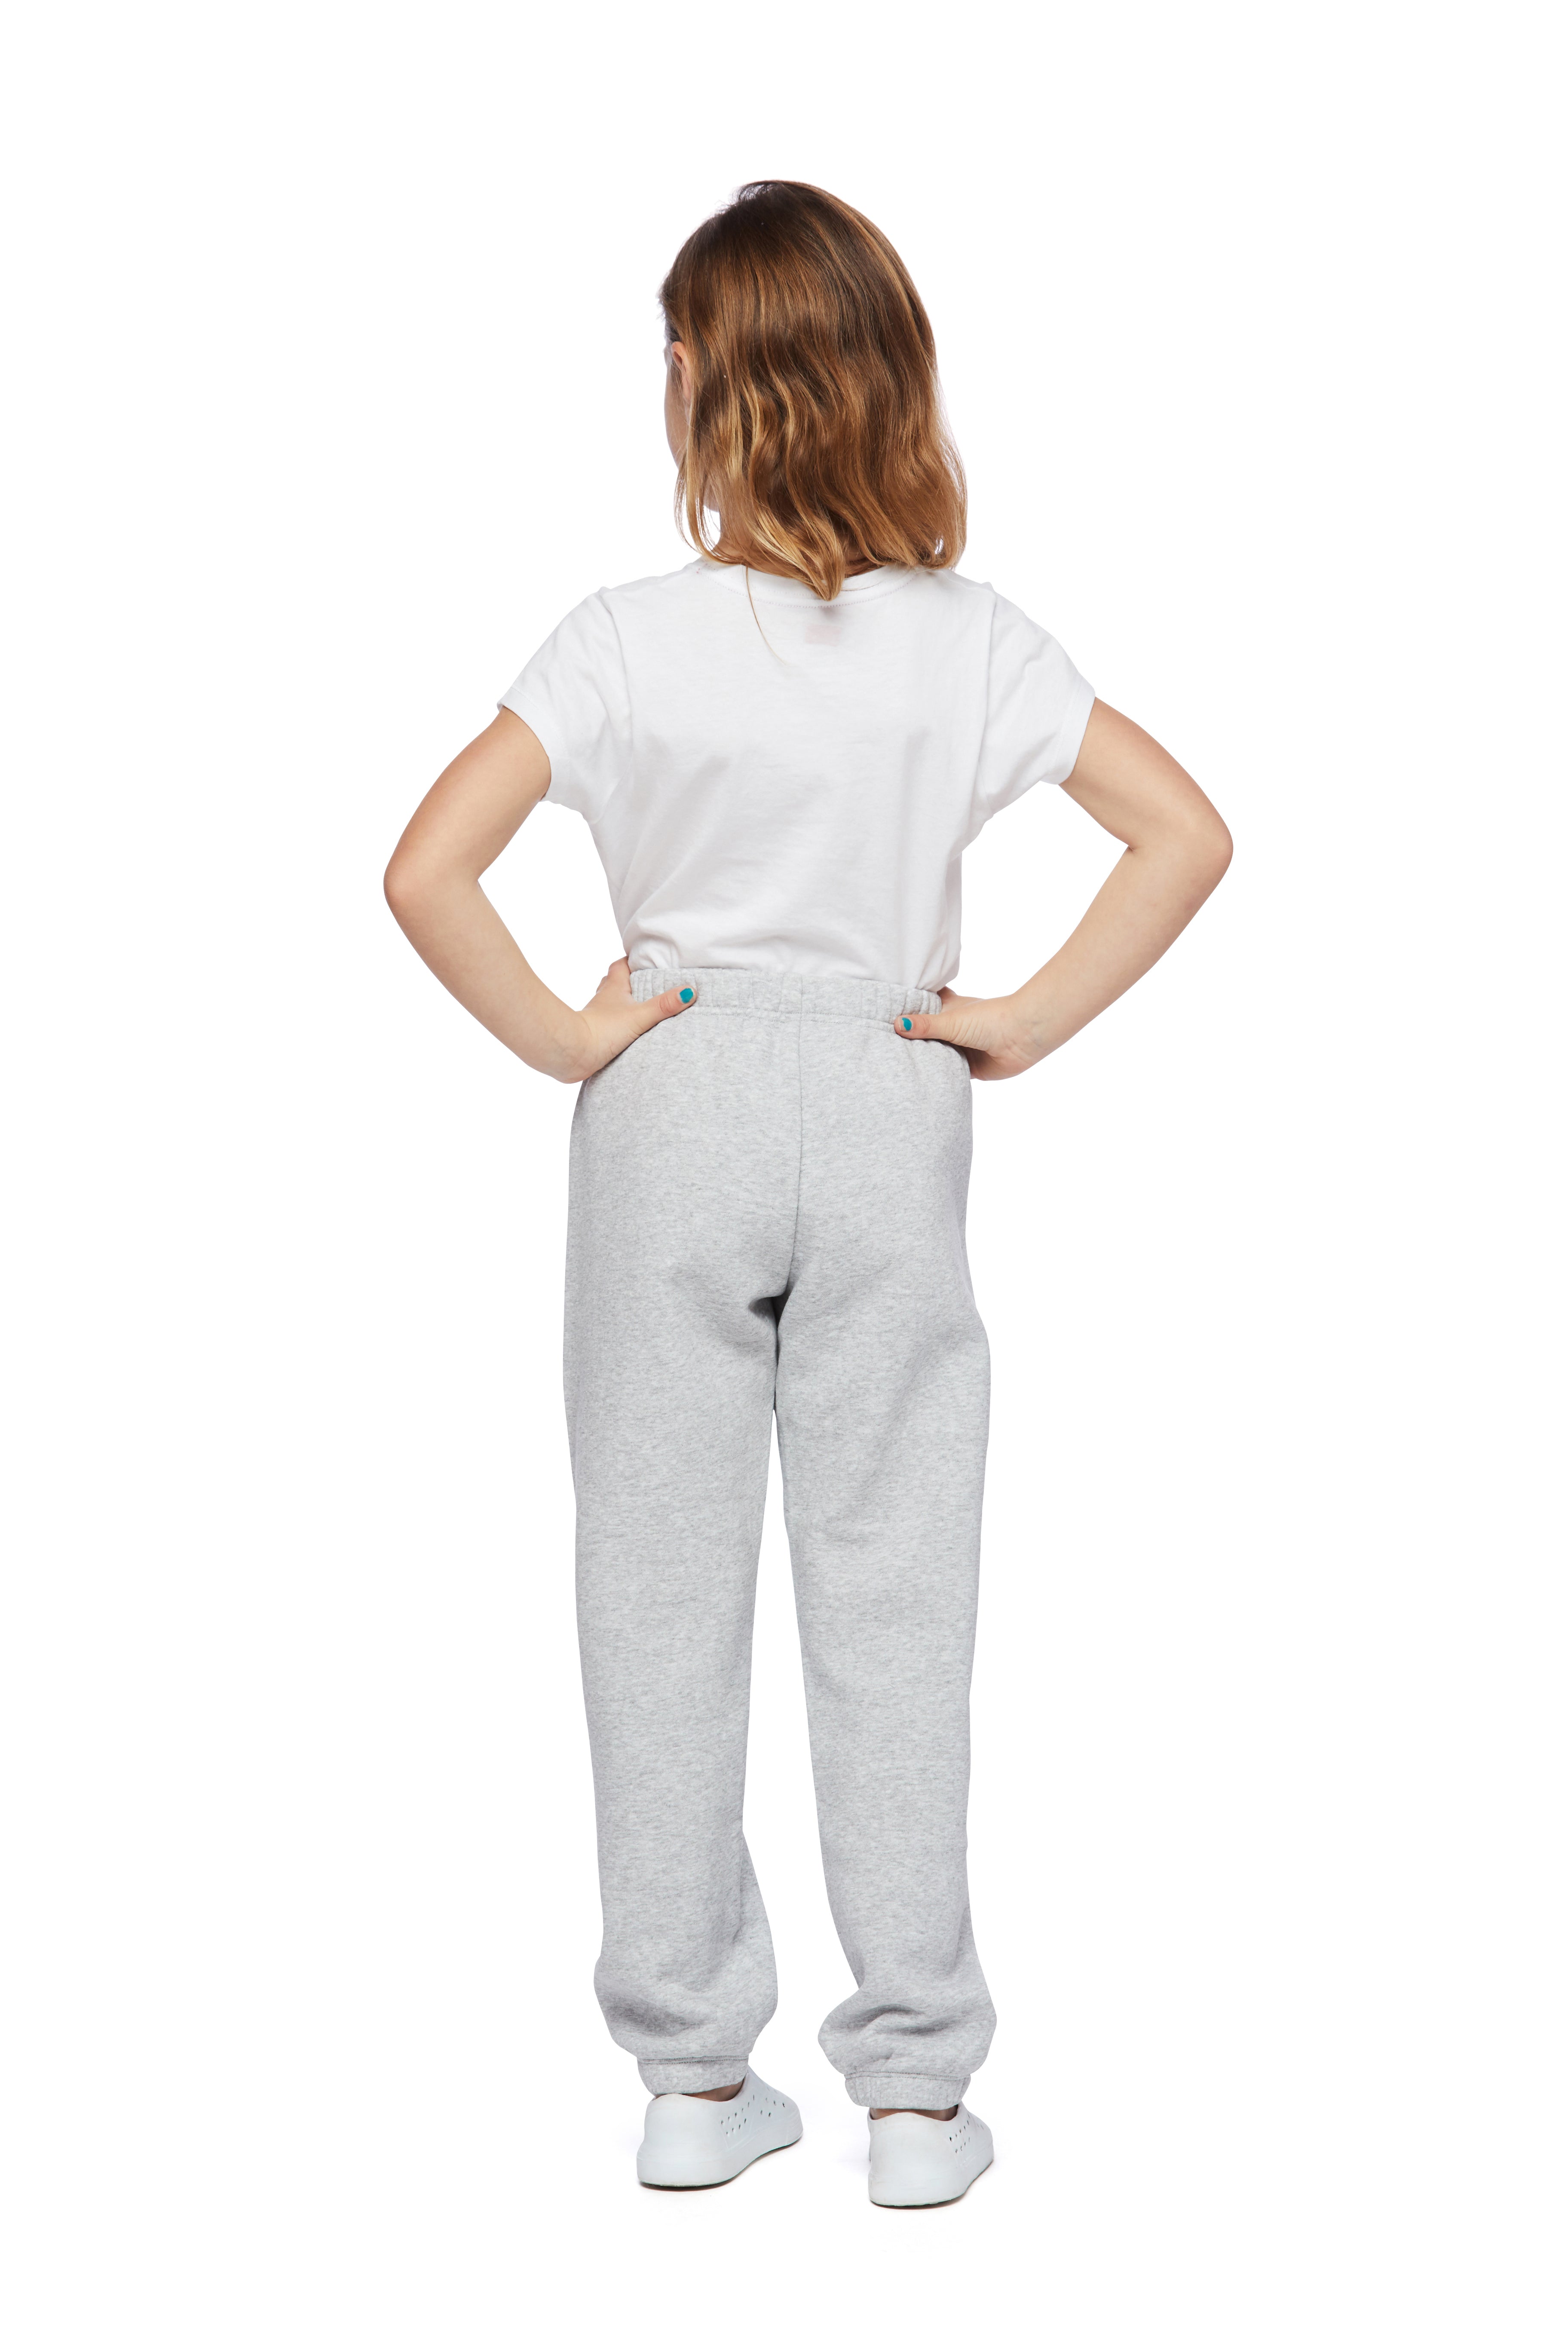 Niki Original kids sweatpants in classic grey from Lazypants - always a great buy at a reasonable price.